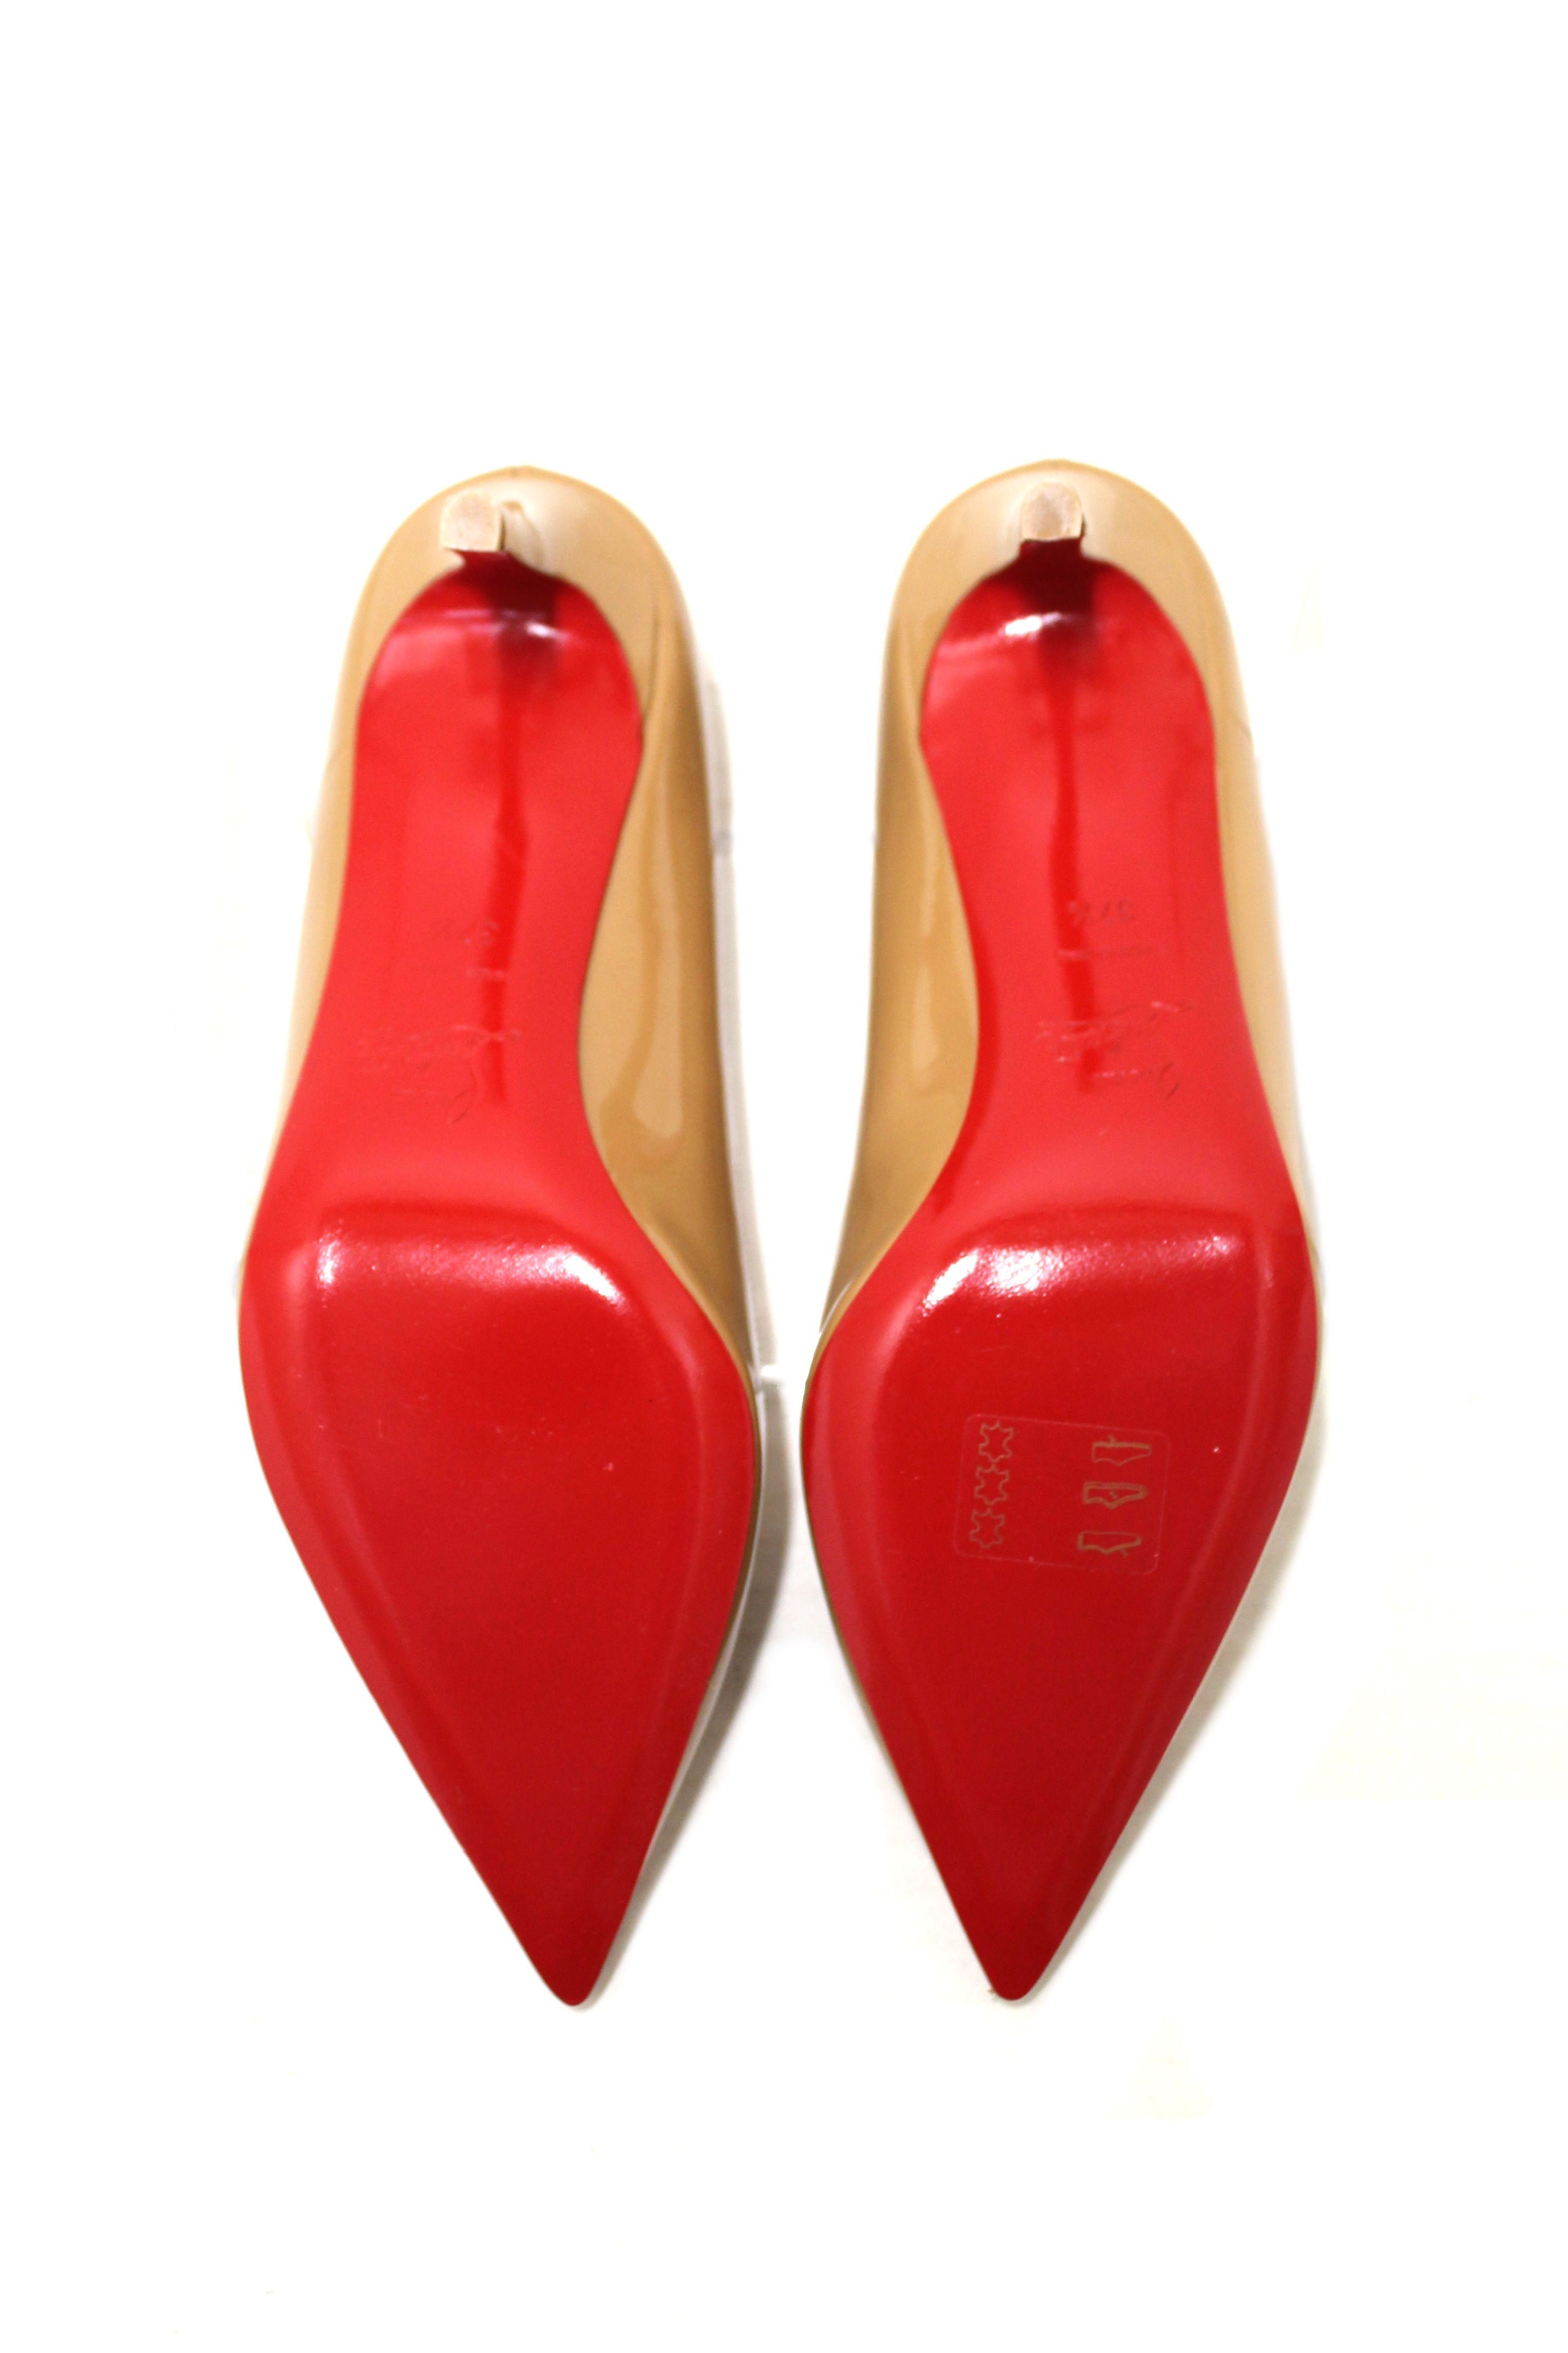 NEW Authentic Christian Louboutin Camel Patent Leather Pigalle Follies 70mm Pumps Size 37.5